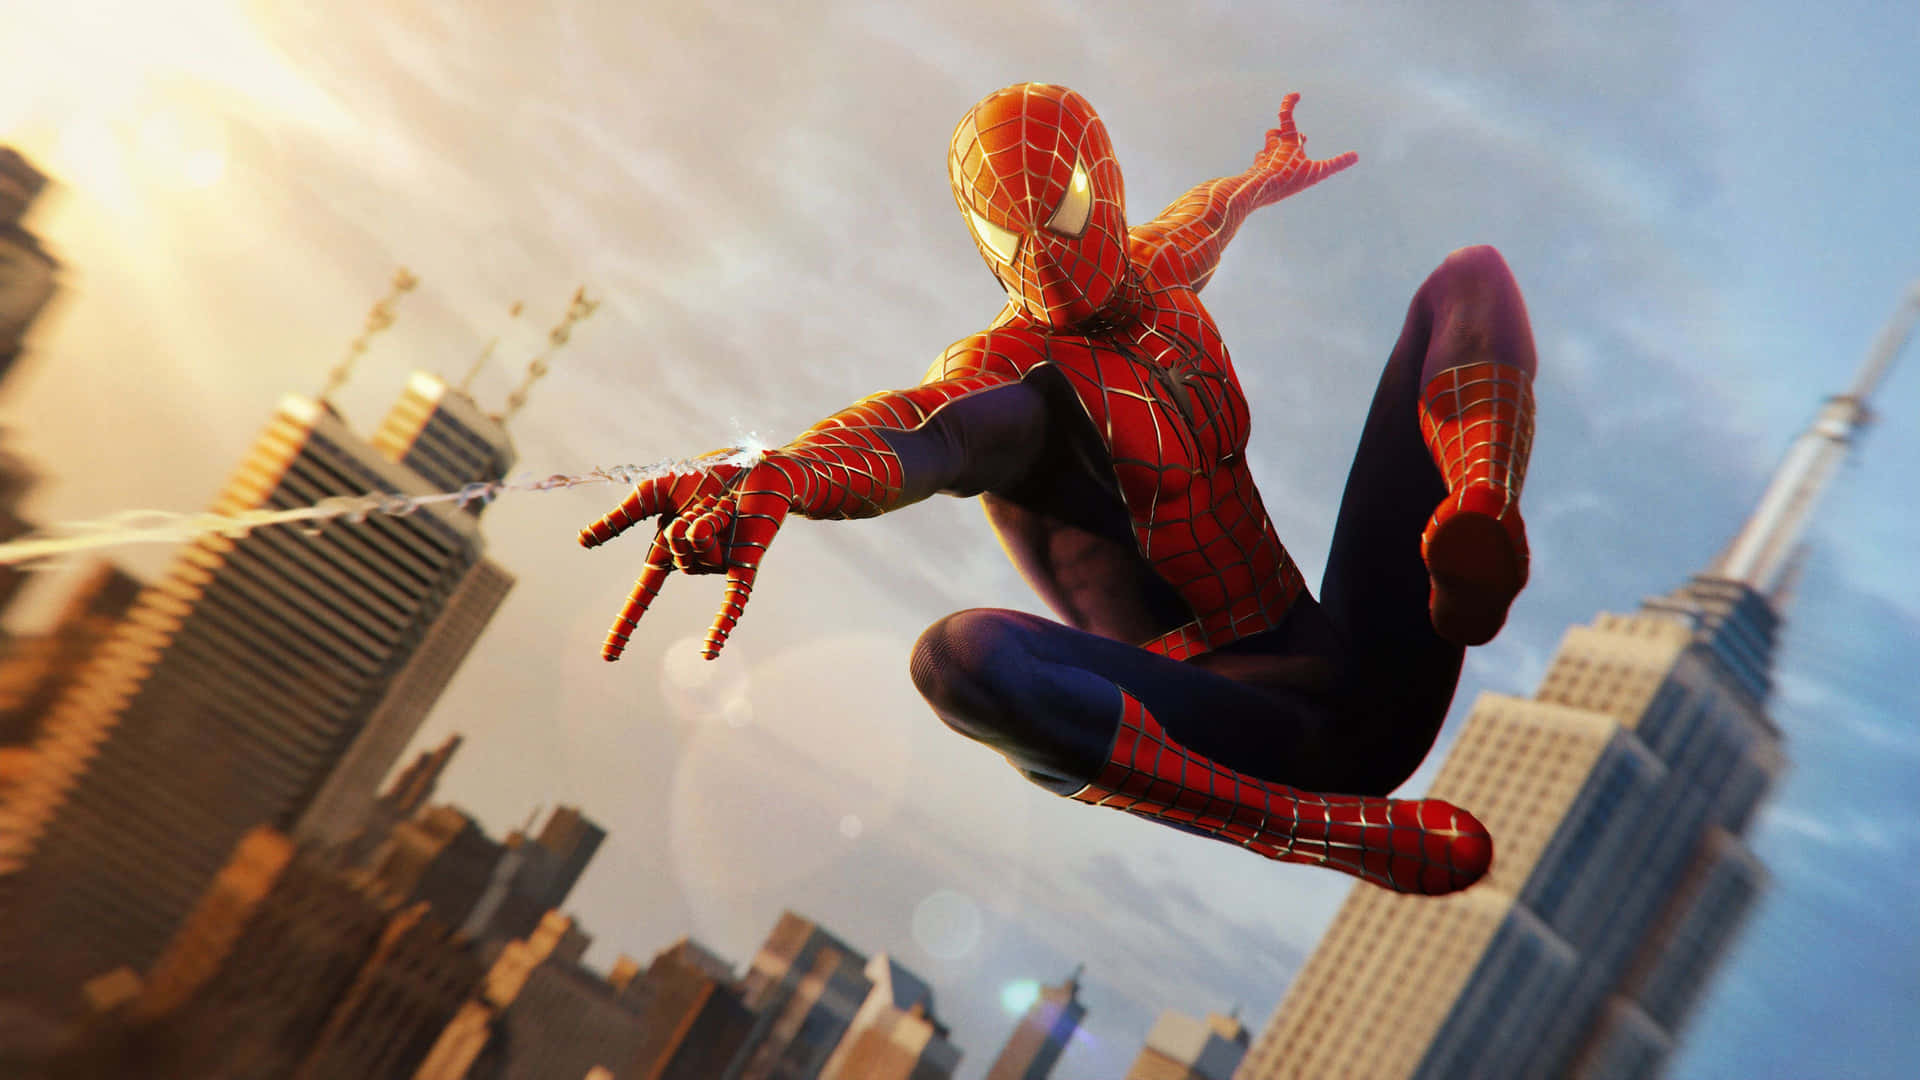 "Climb to the top of New York City with Spider-Man in this stunning 4K resolution game." Wallpaper